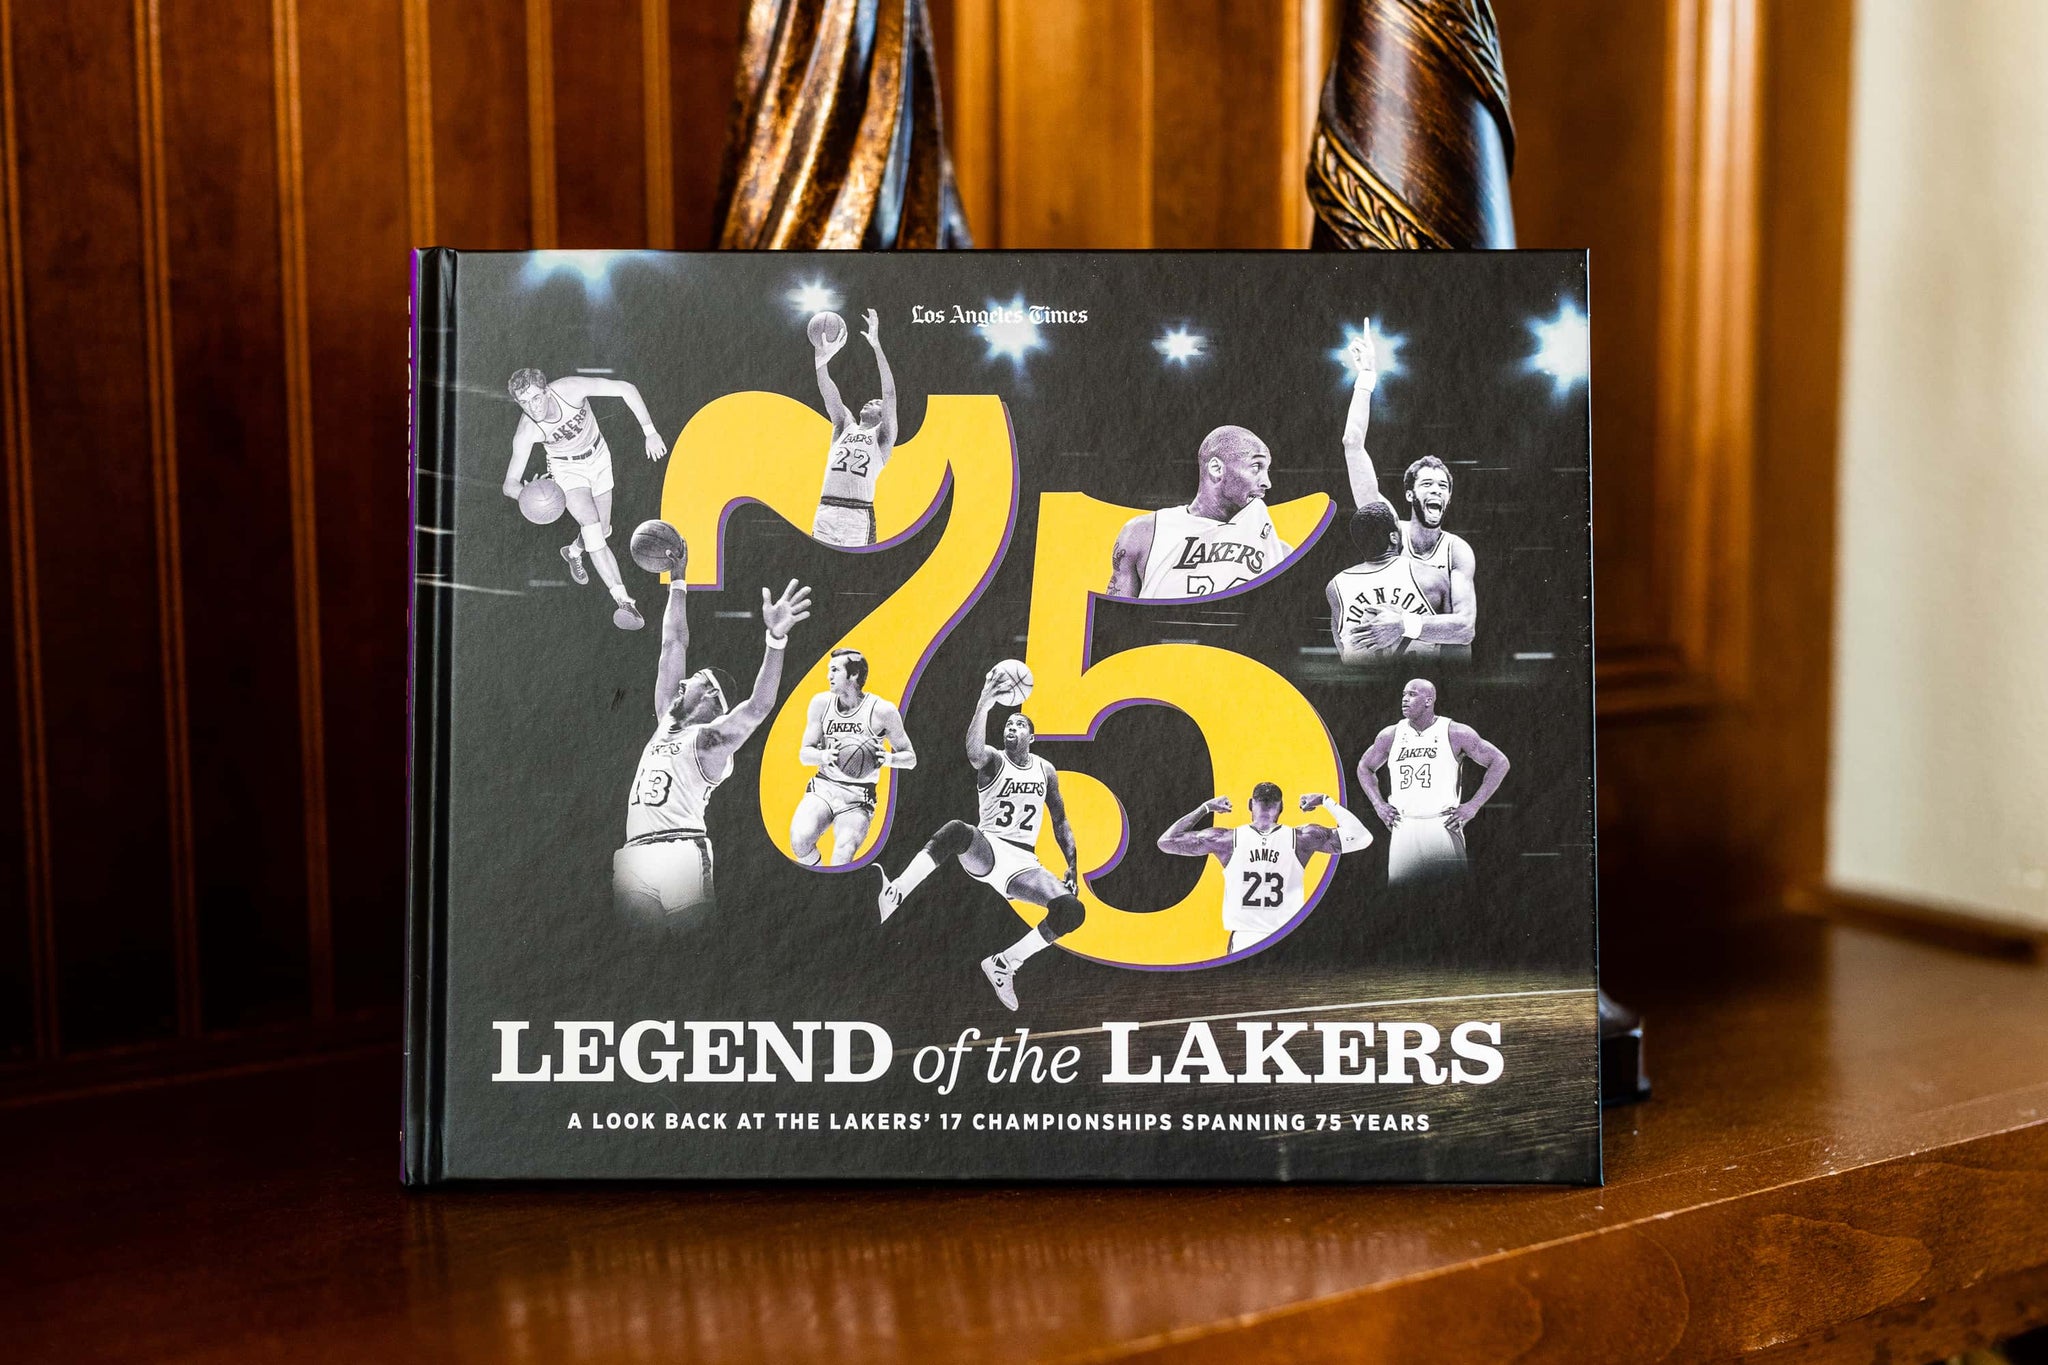 Los Angeles Lakers - Here's to the legends, the banners, the legacy. This  season we celebrate 75 years of Lakers Basketball ✨ #Lakers75